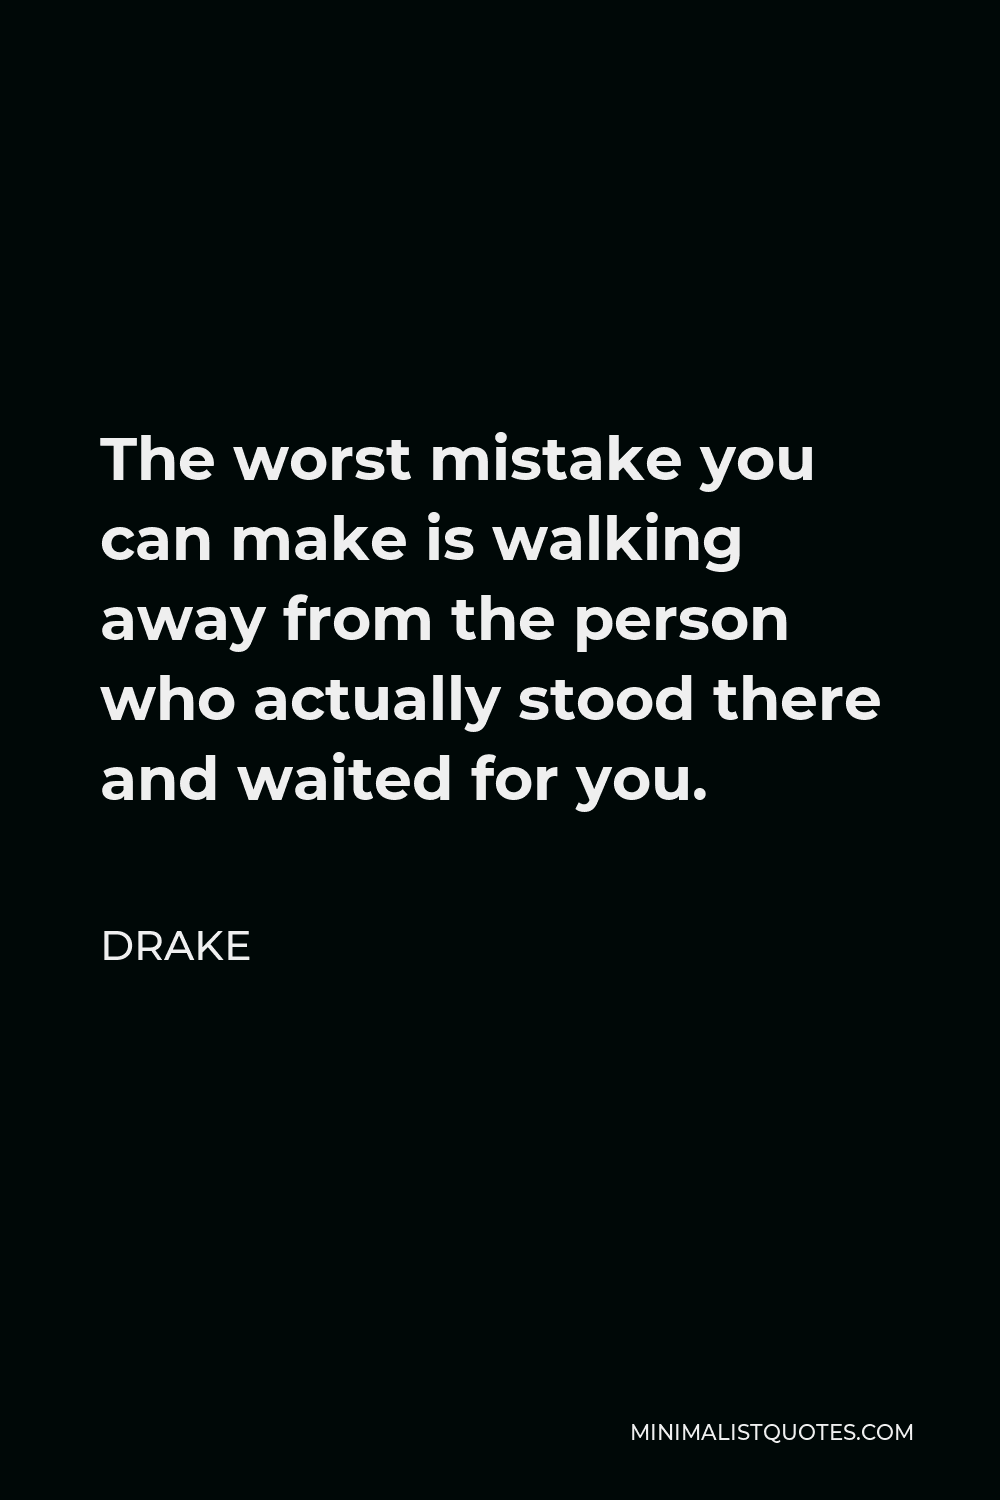 Drake Quote - The worst mistake you can make is walking away from the person who actually stood there and waited for you.